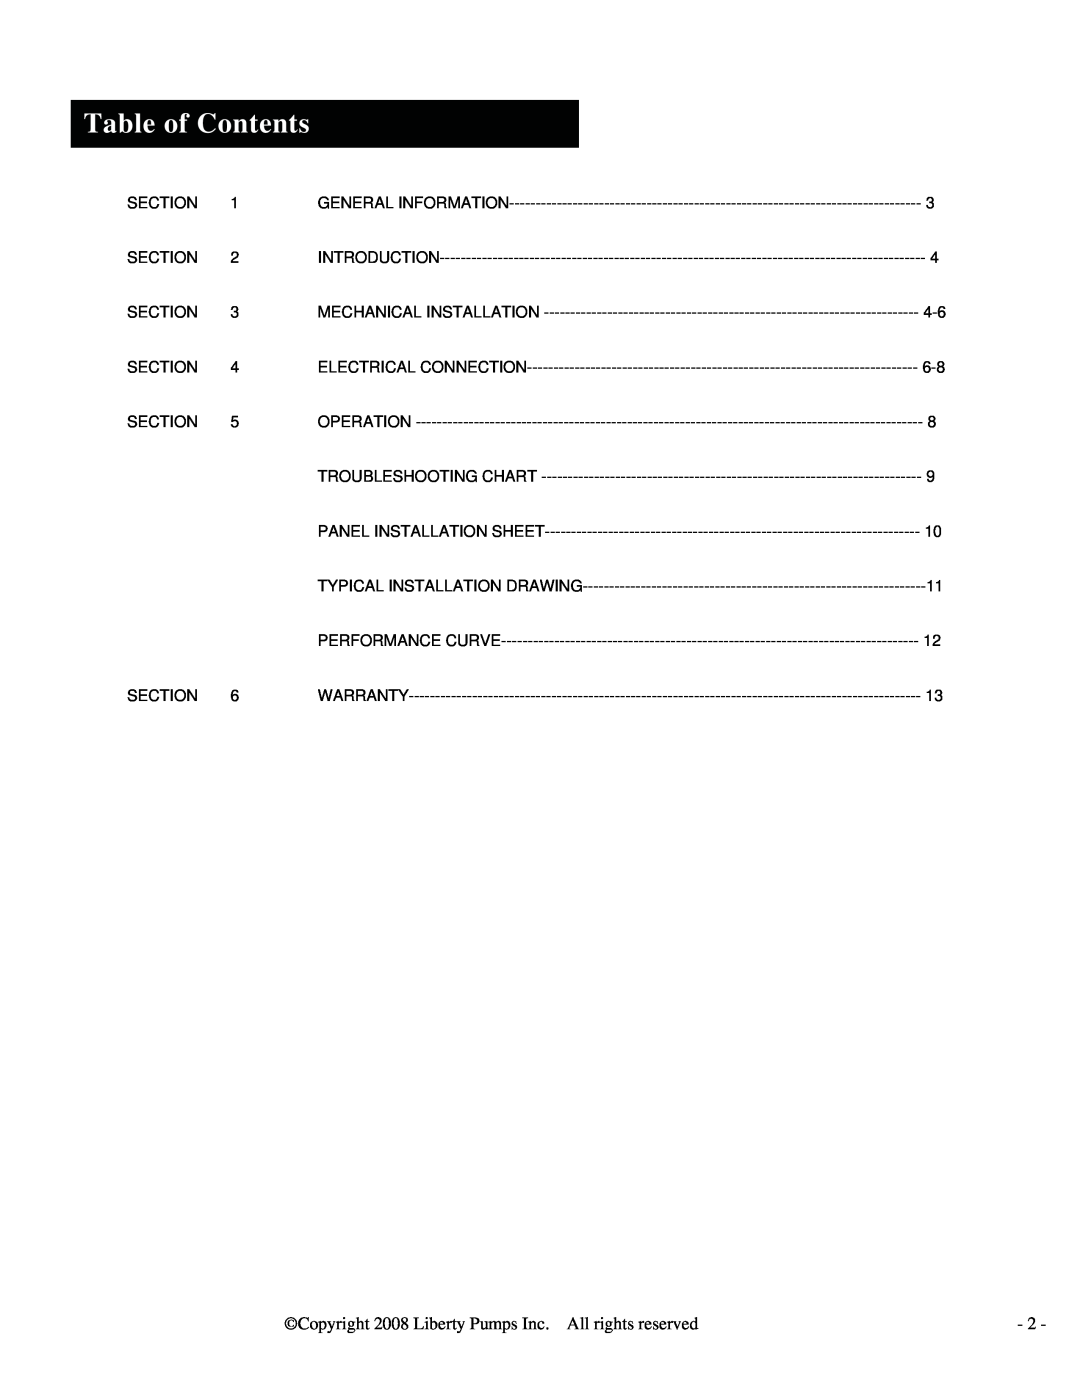 HP LSGX202A, LSGX204M, LSGX203M manual Table of Contents, Copyright 2008 Liberty Pumps Inc. All rights reserved, Introduction 